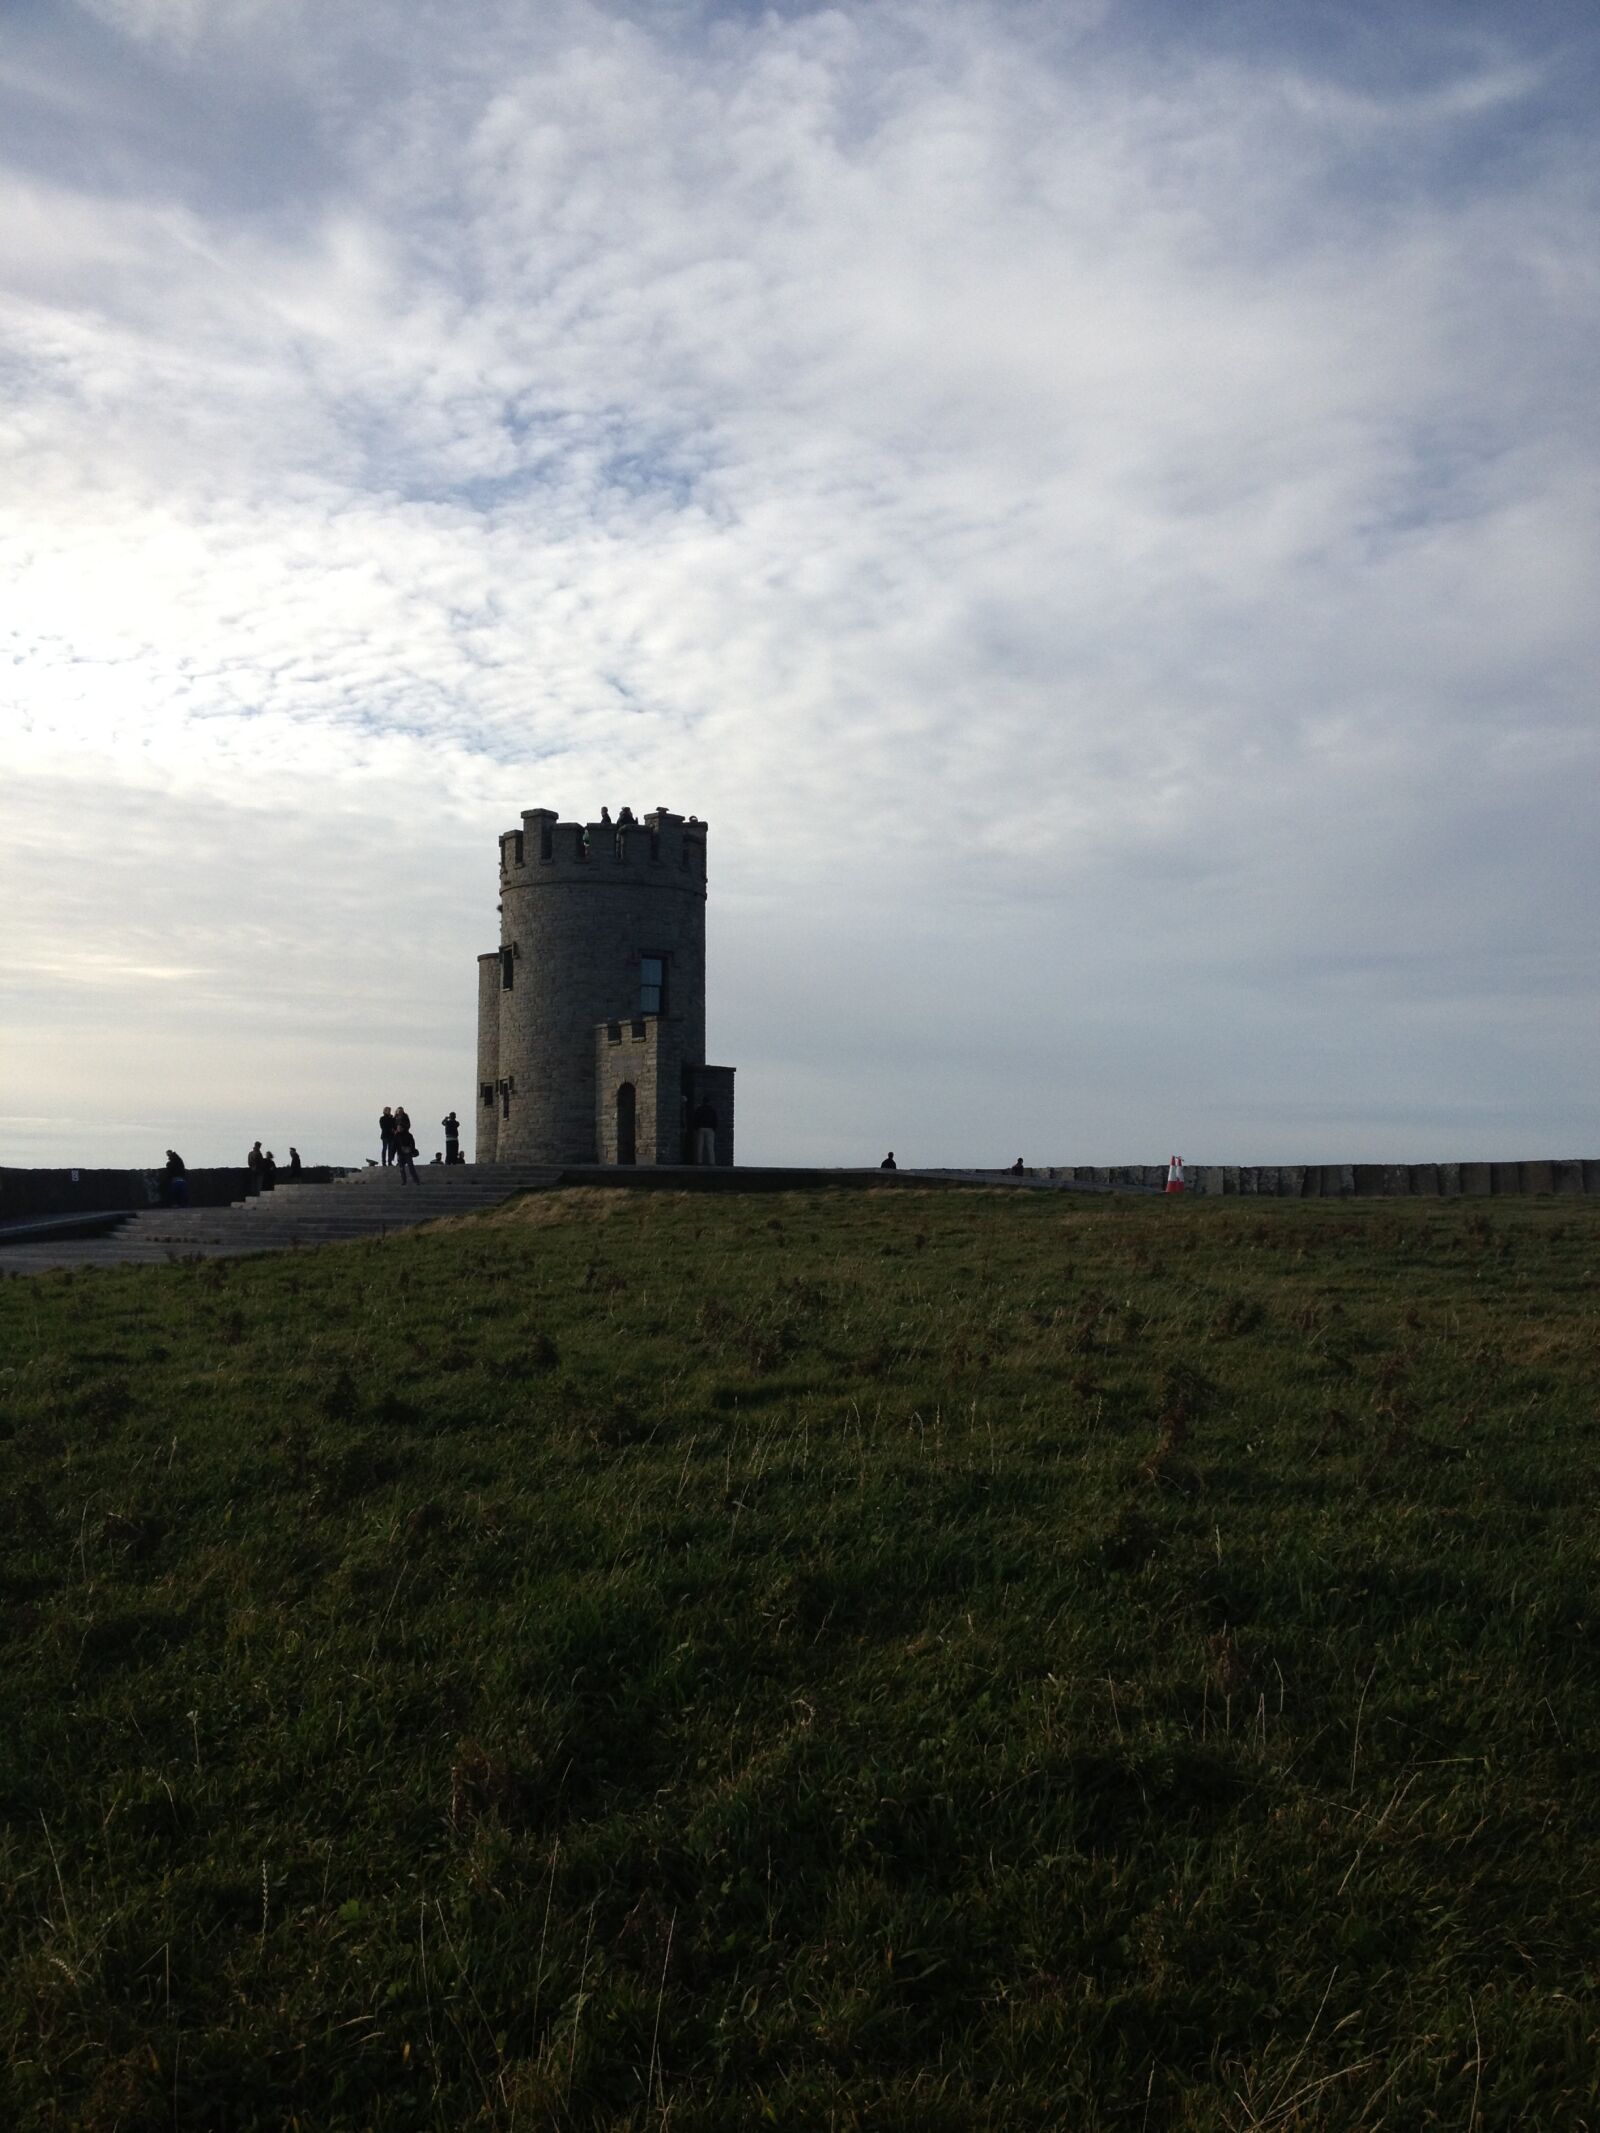 Apple iPhone 4S sample photo. Cliffs of moher, county photography